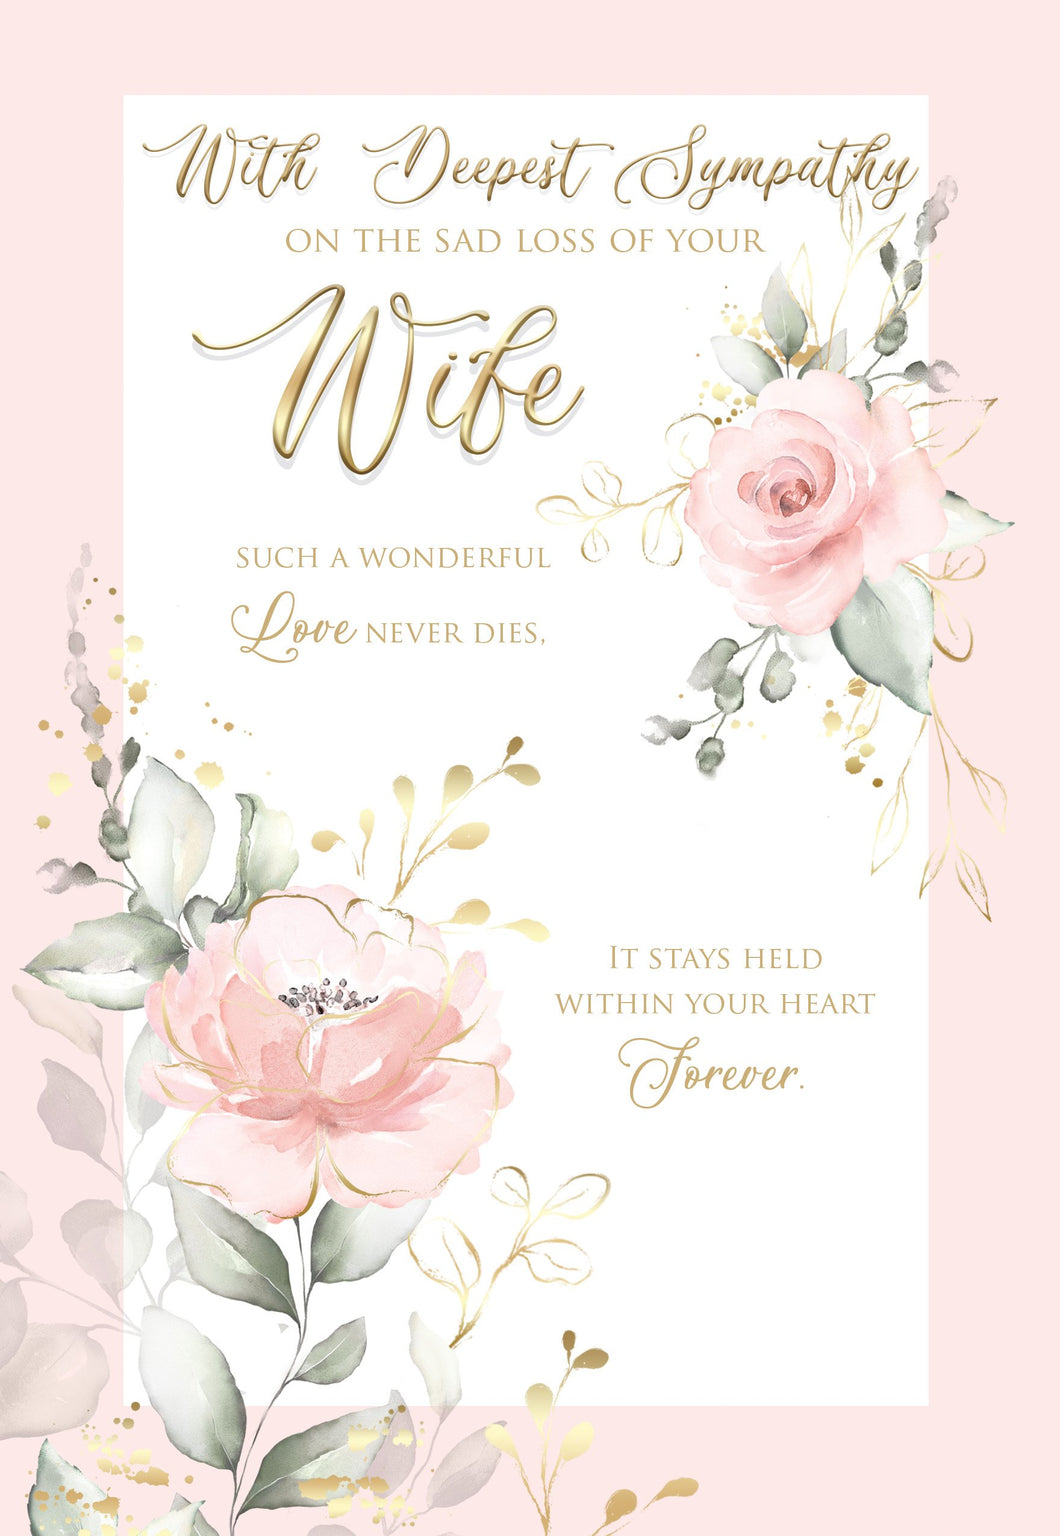 Loss of Wife - Sympathy Cards